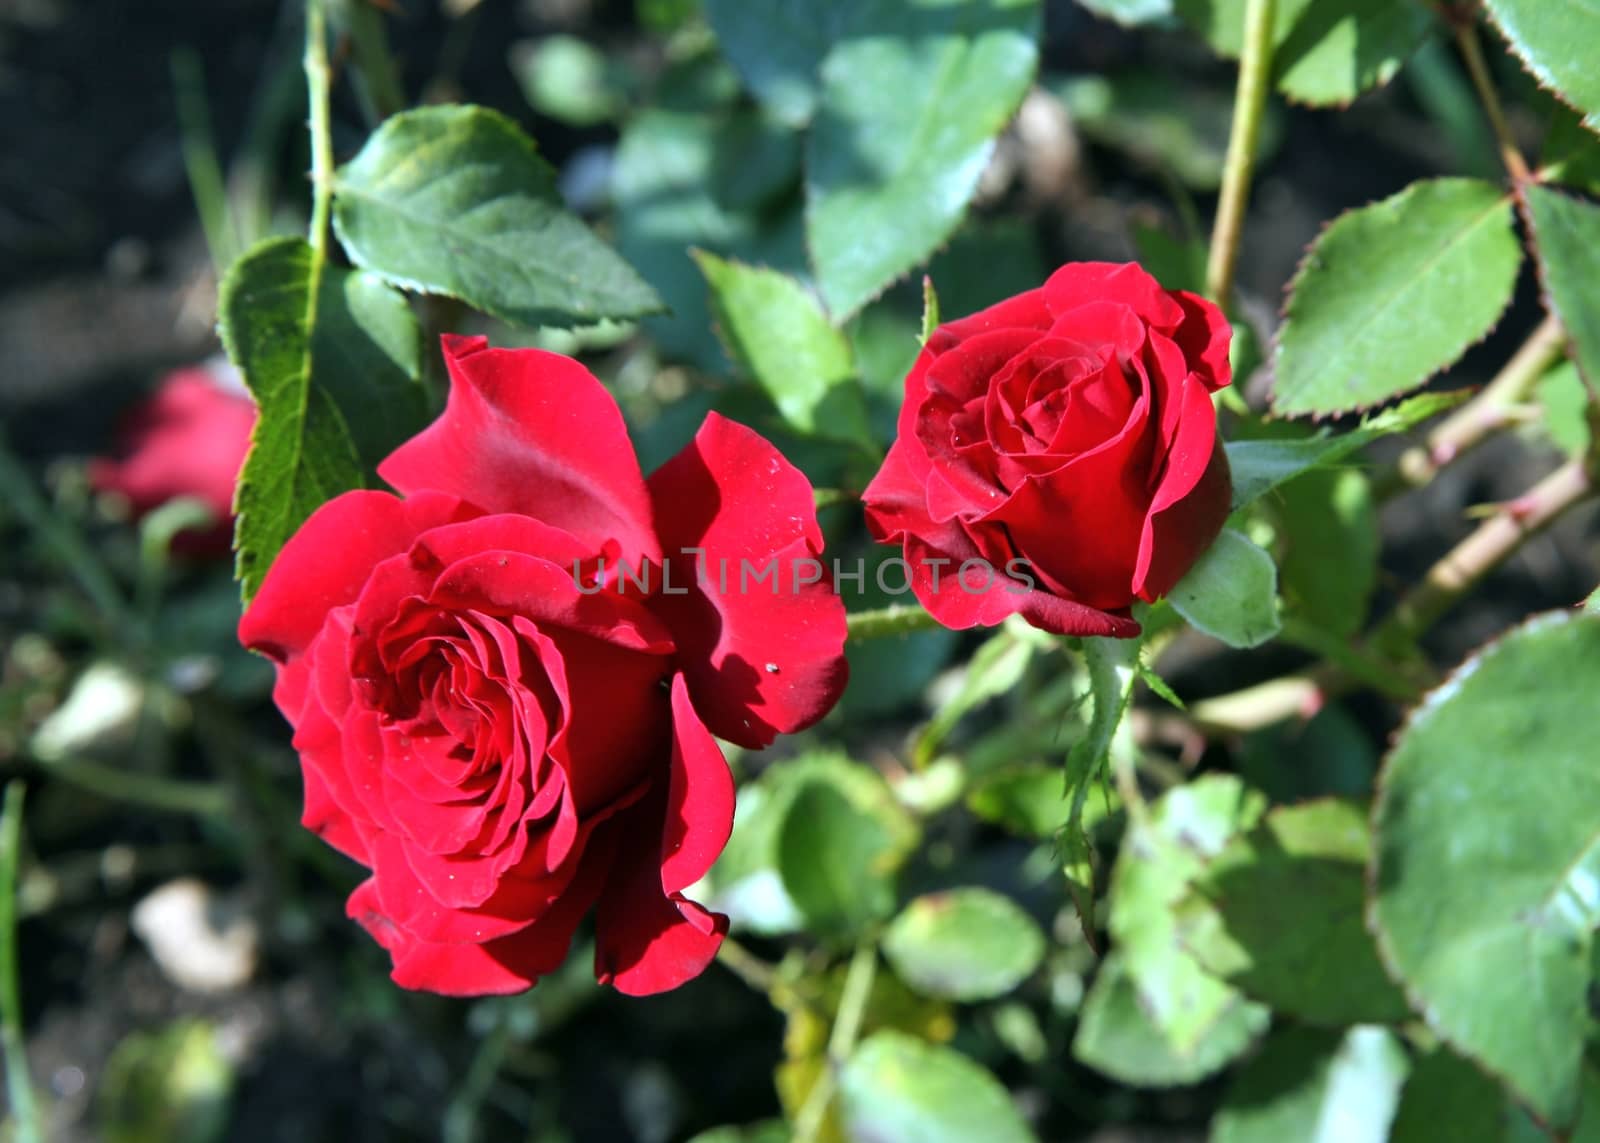 Rose buds in the garden over natural green background